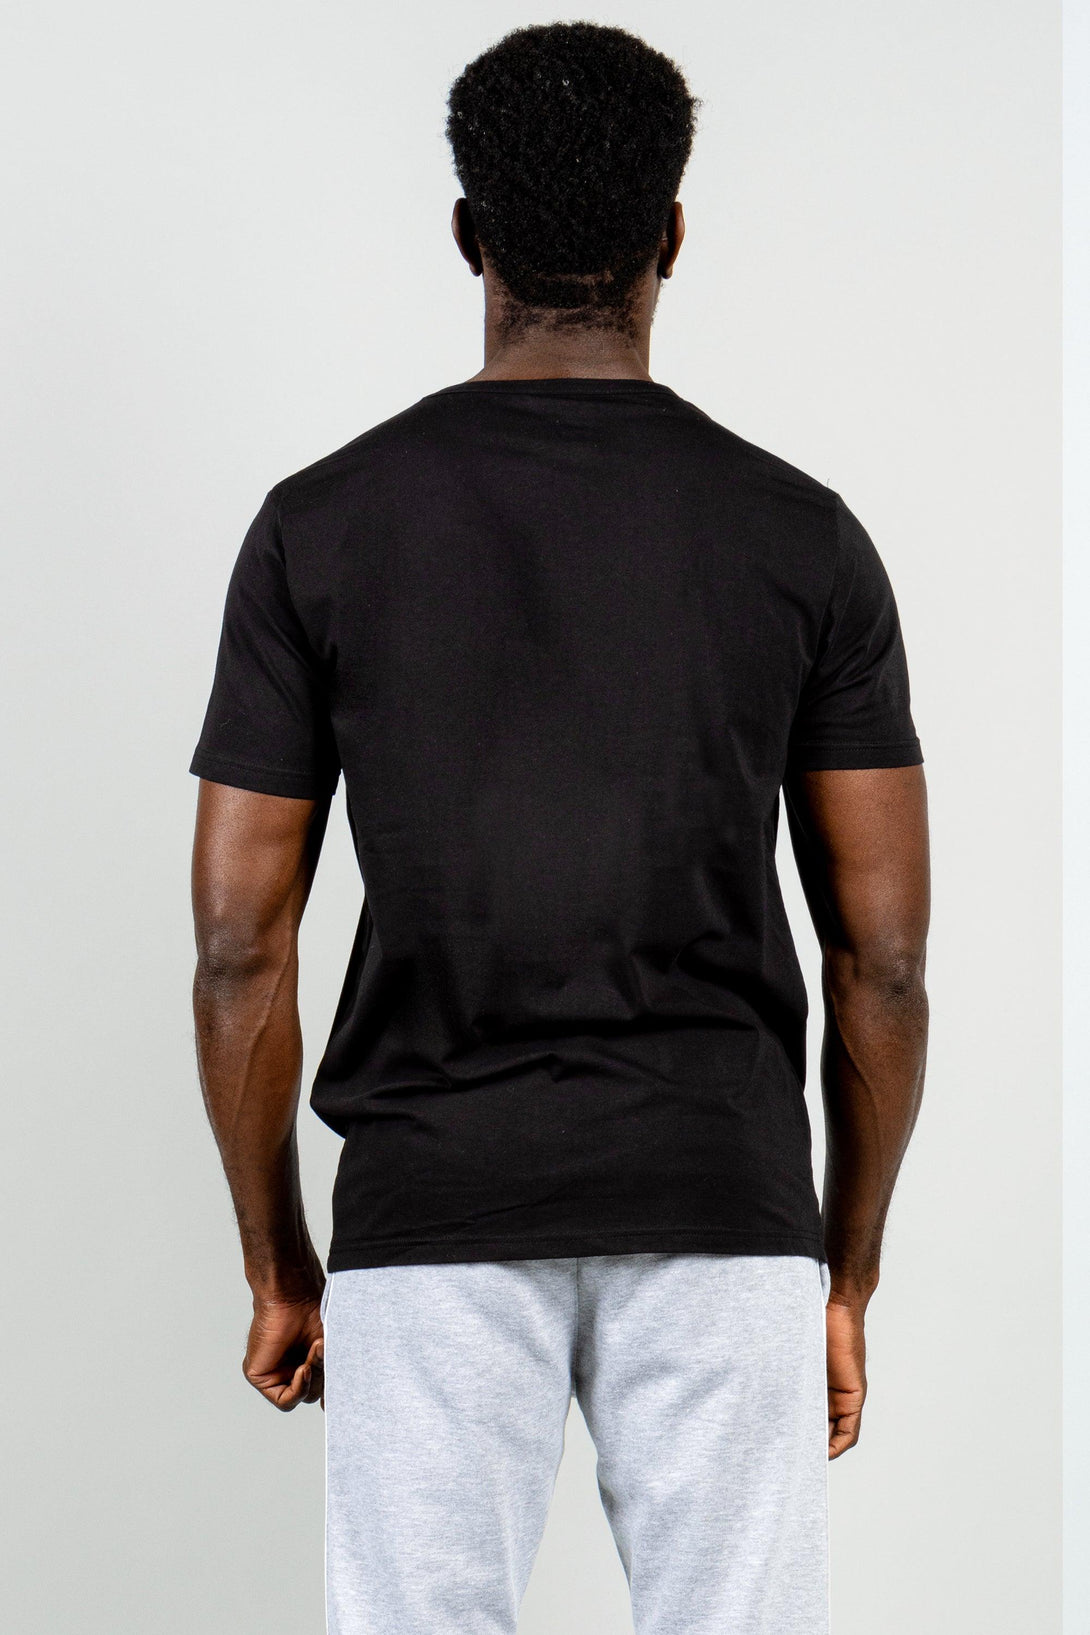 Round Neck T-Shirts | CHARCOAL - GREY - BLACK - Pack of 6 - FTS